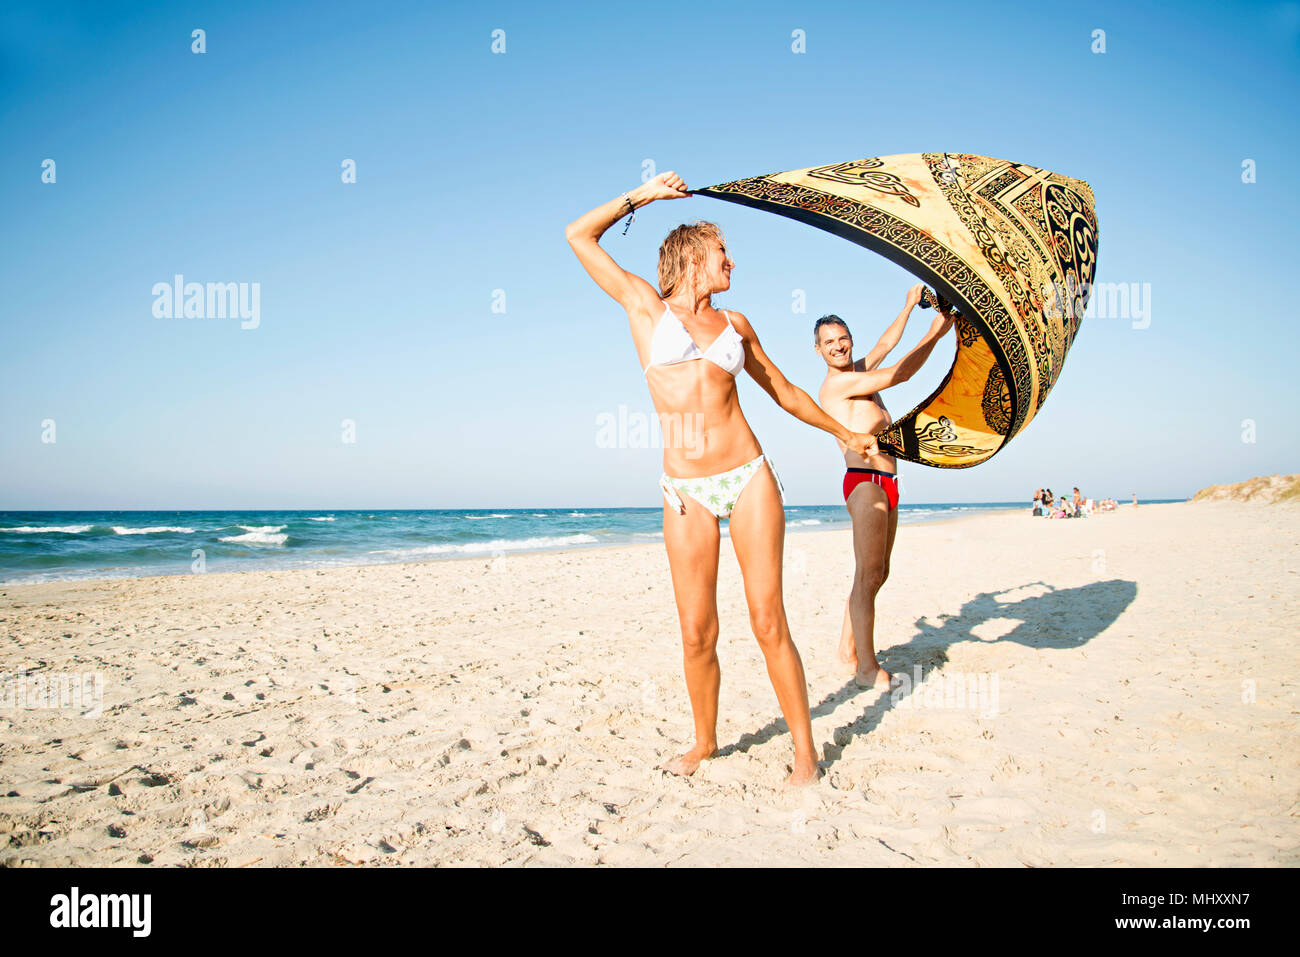 Mature couple on beach, holding beach blanket, laughing Stock Photo